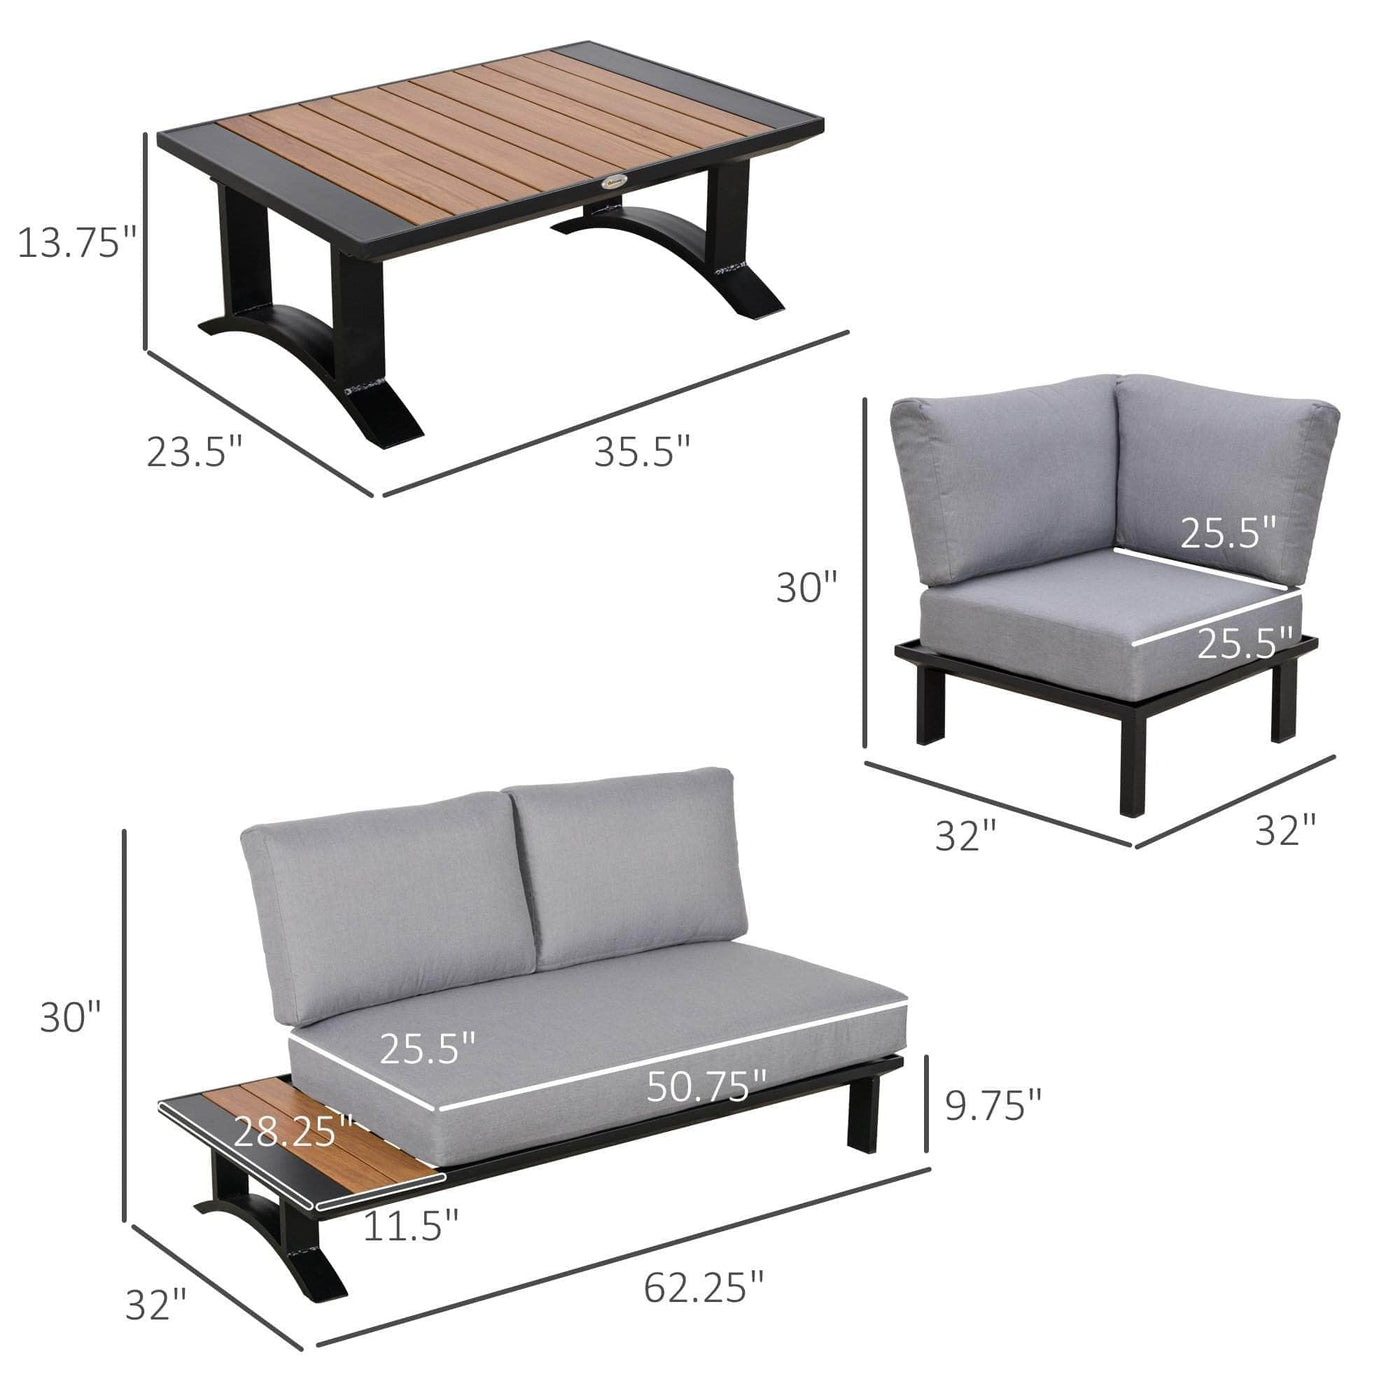 Outsunny 4 Piece Outdoor Patio Corner Sectional Sofa with 2 Side Tables ...